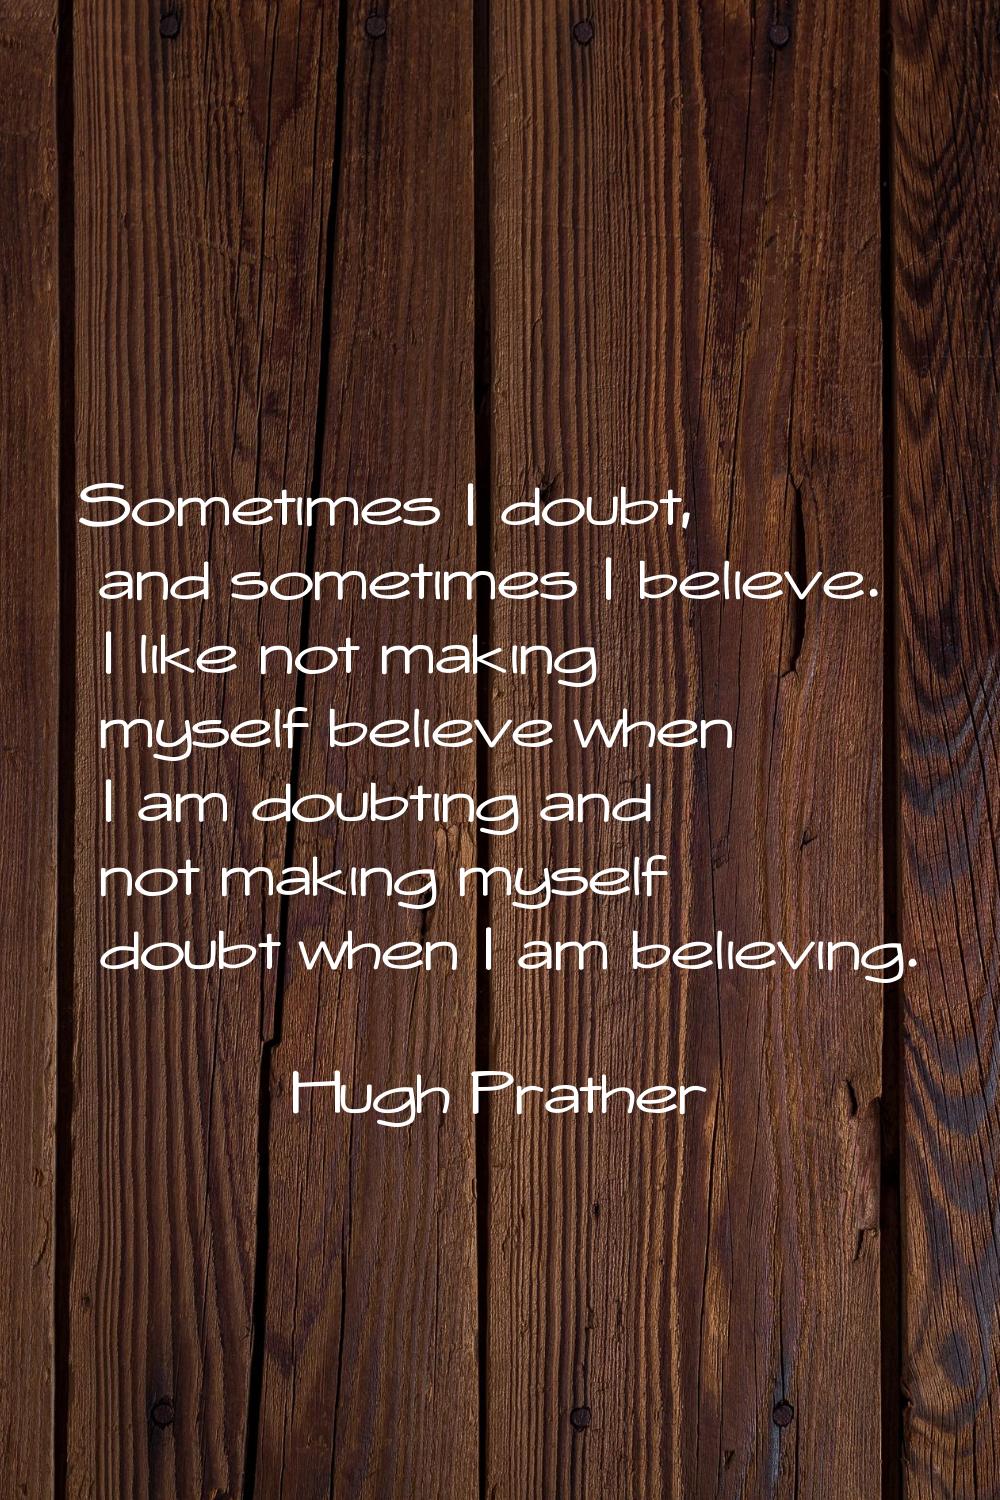 Sometimes I doubt, and sometimes I believe. I like not making myself believe when I am doubting and